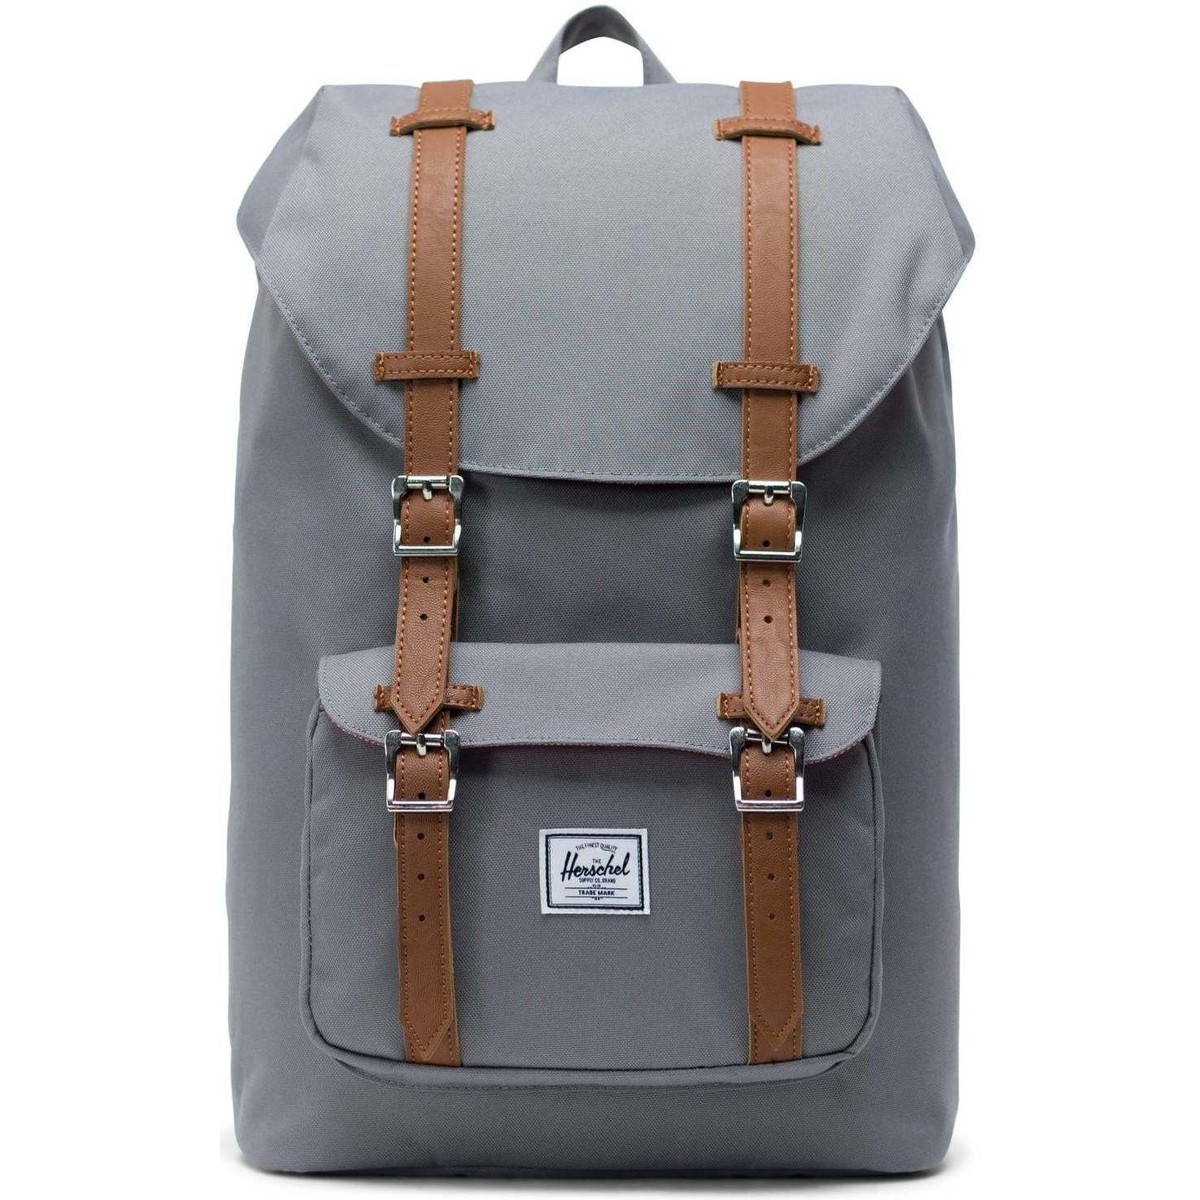 Sacs House of Hounds Little America Mid-Volume Grey/Tan Synthetic Leather Gris